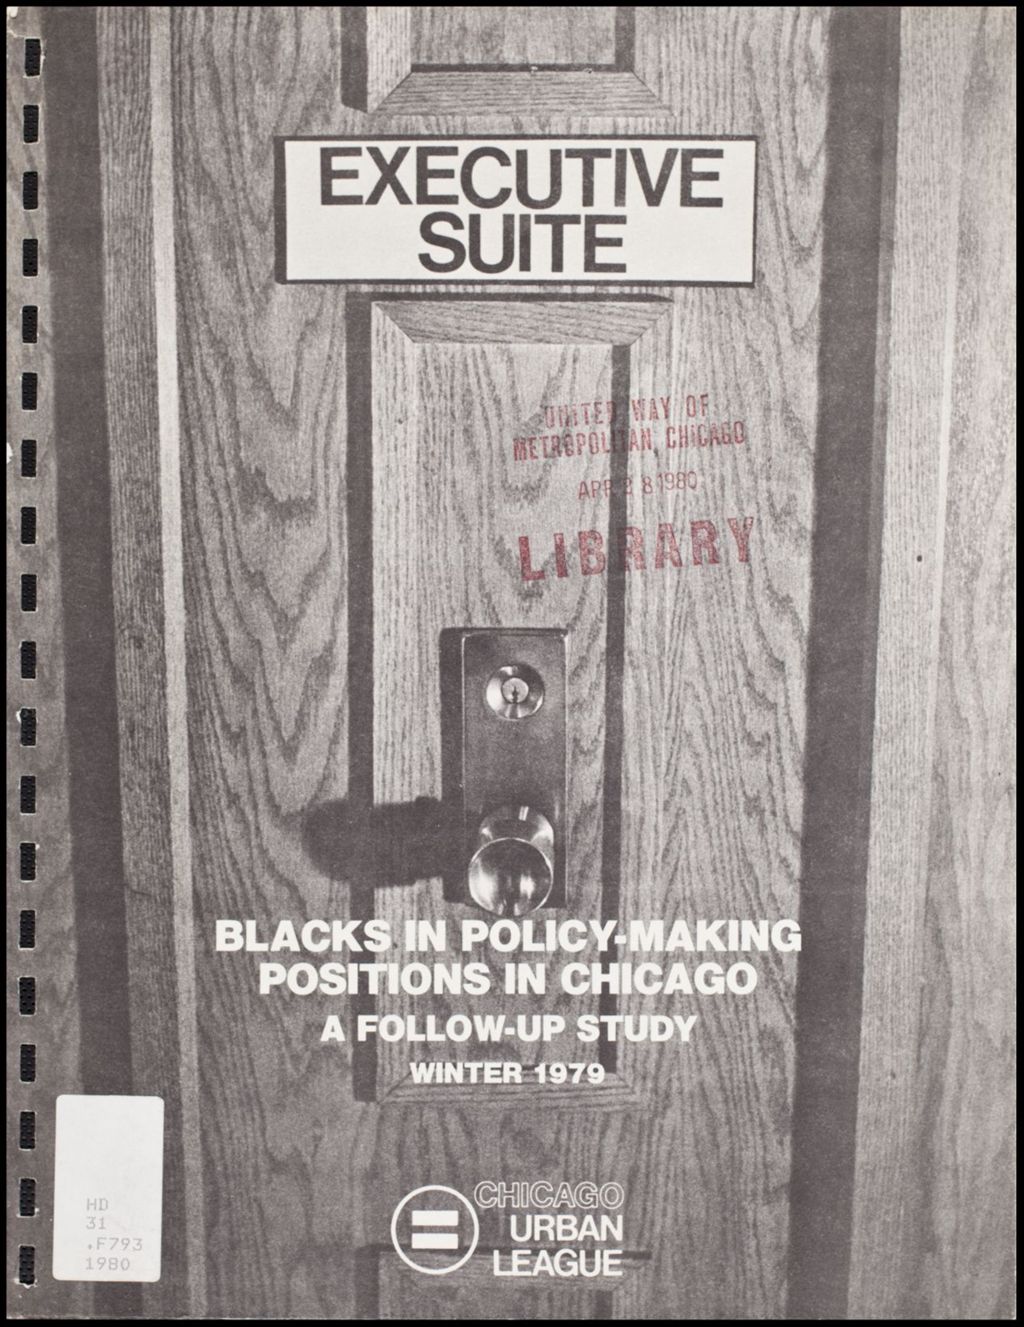 Study: Blacks in Policy Making Positions in Chicago, 1979 (Folder IV-734a)